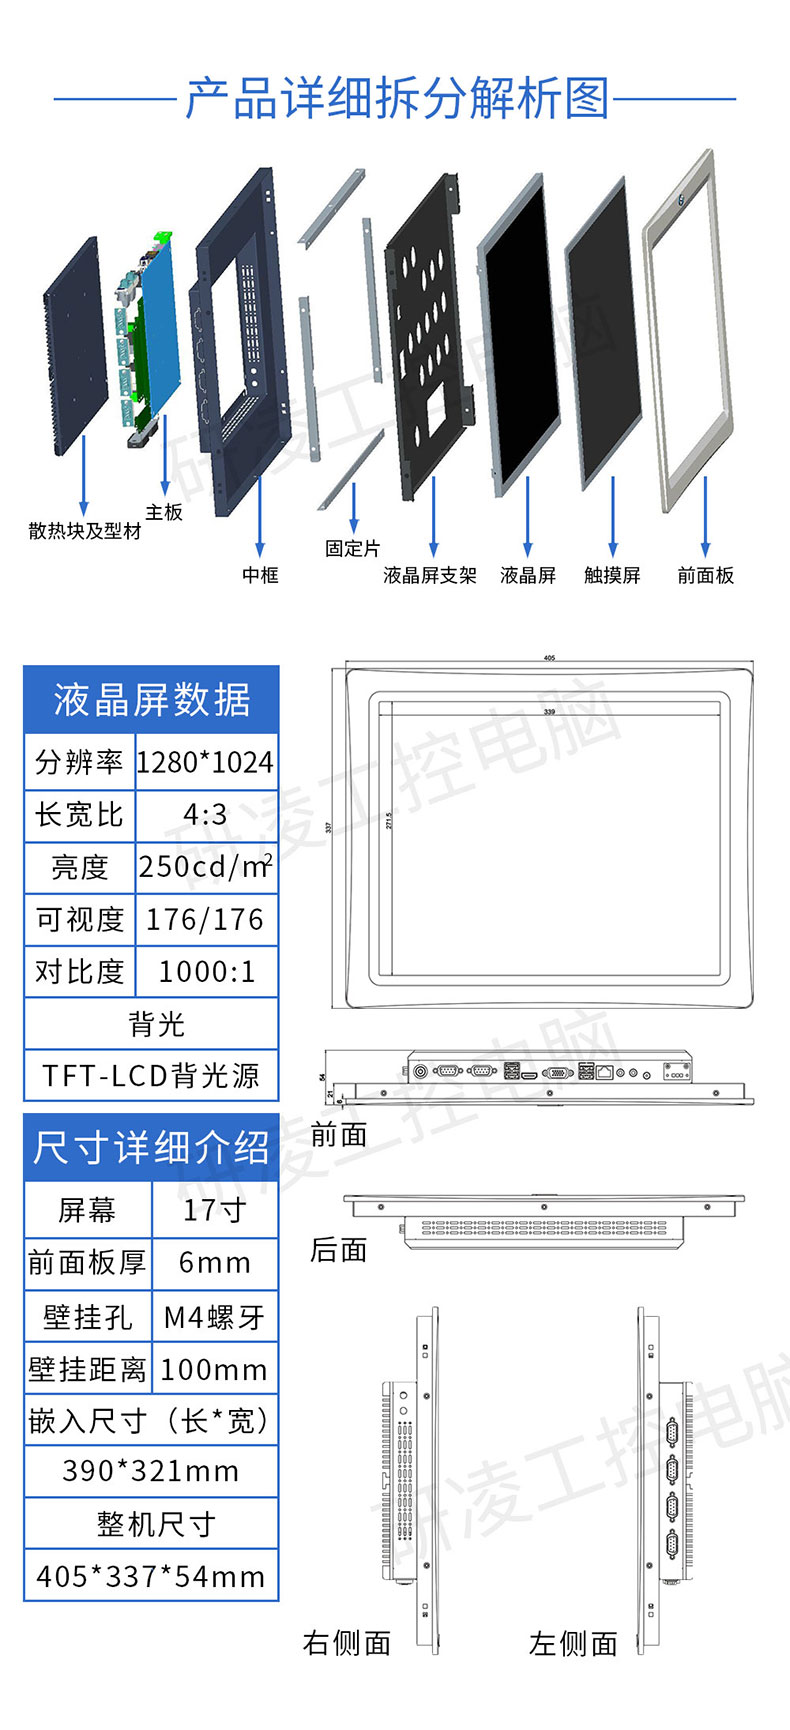 Yanling Core i5 embedded 17 inch industrial touch screen all-in-one machine j1900 silent IP64 dustproof computer